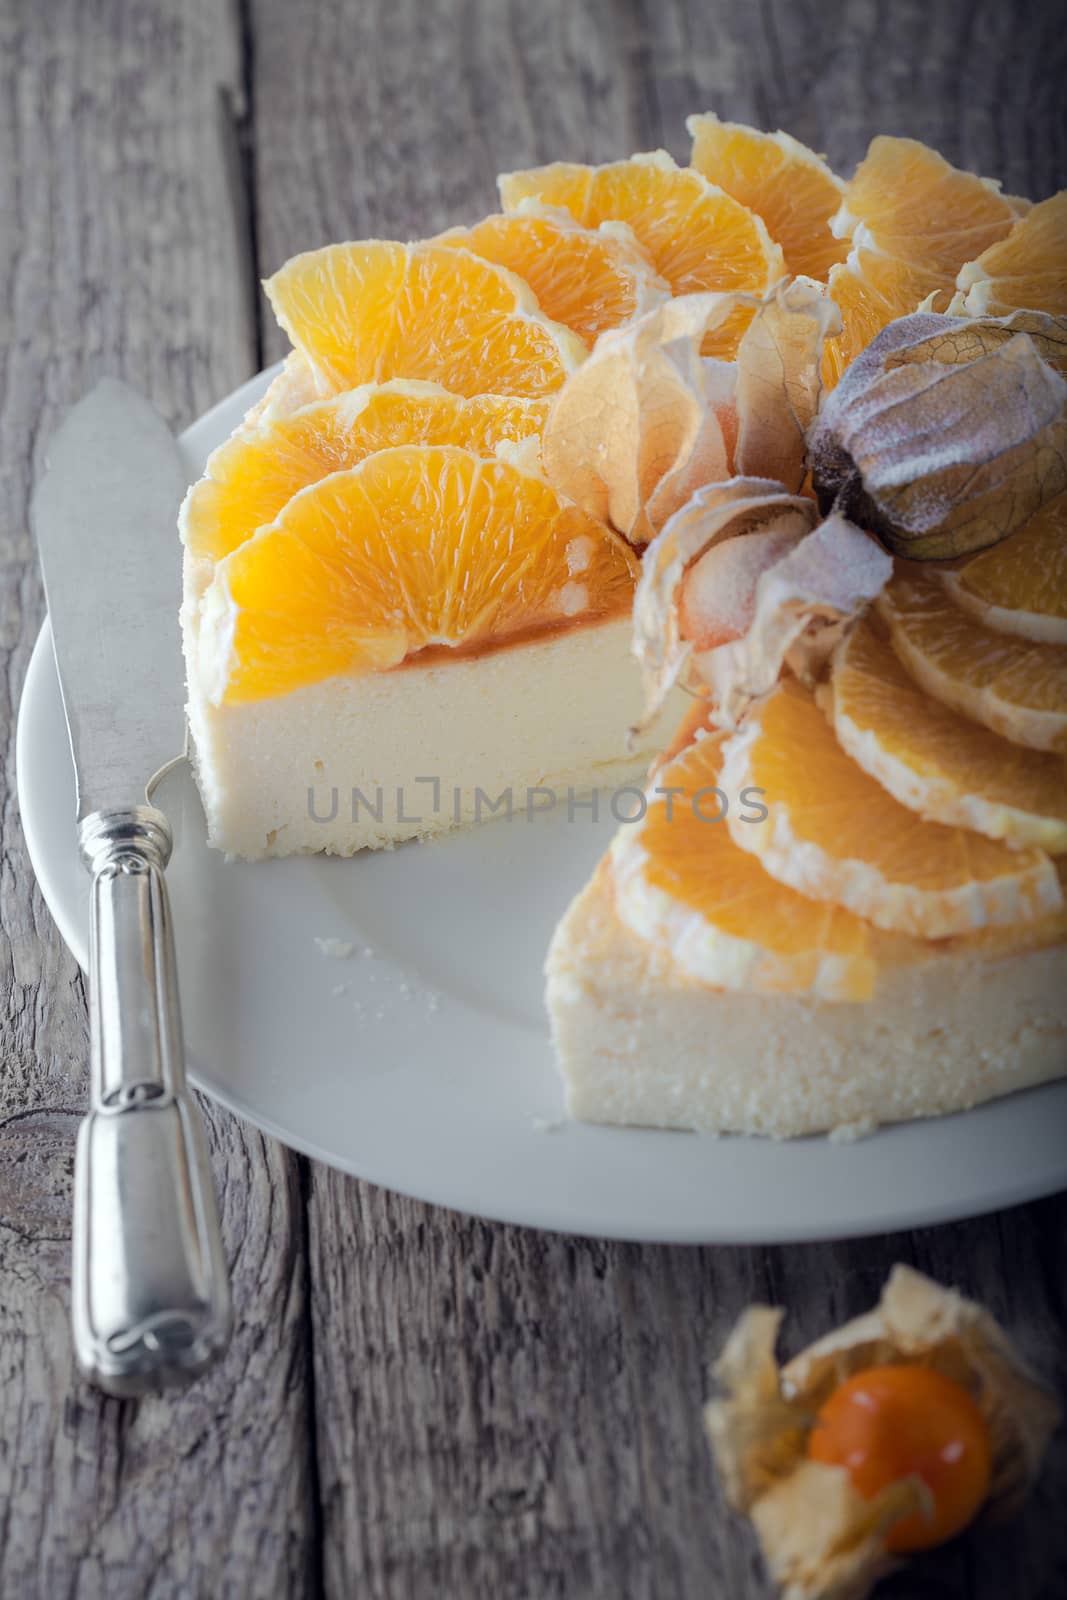 Cheesecake decorated with oranges and physalis on a plate.